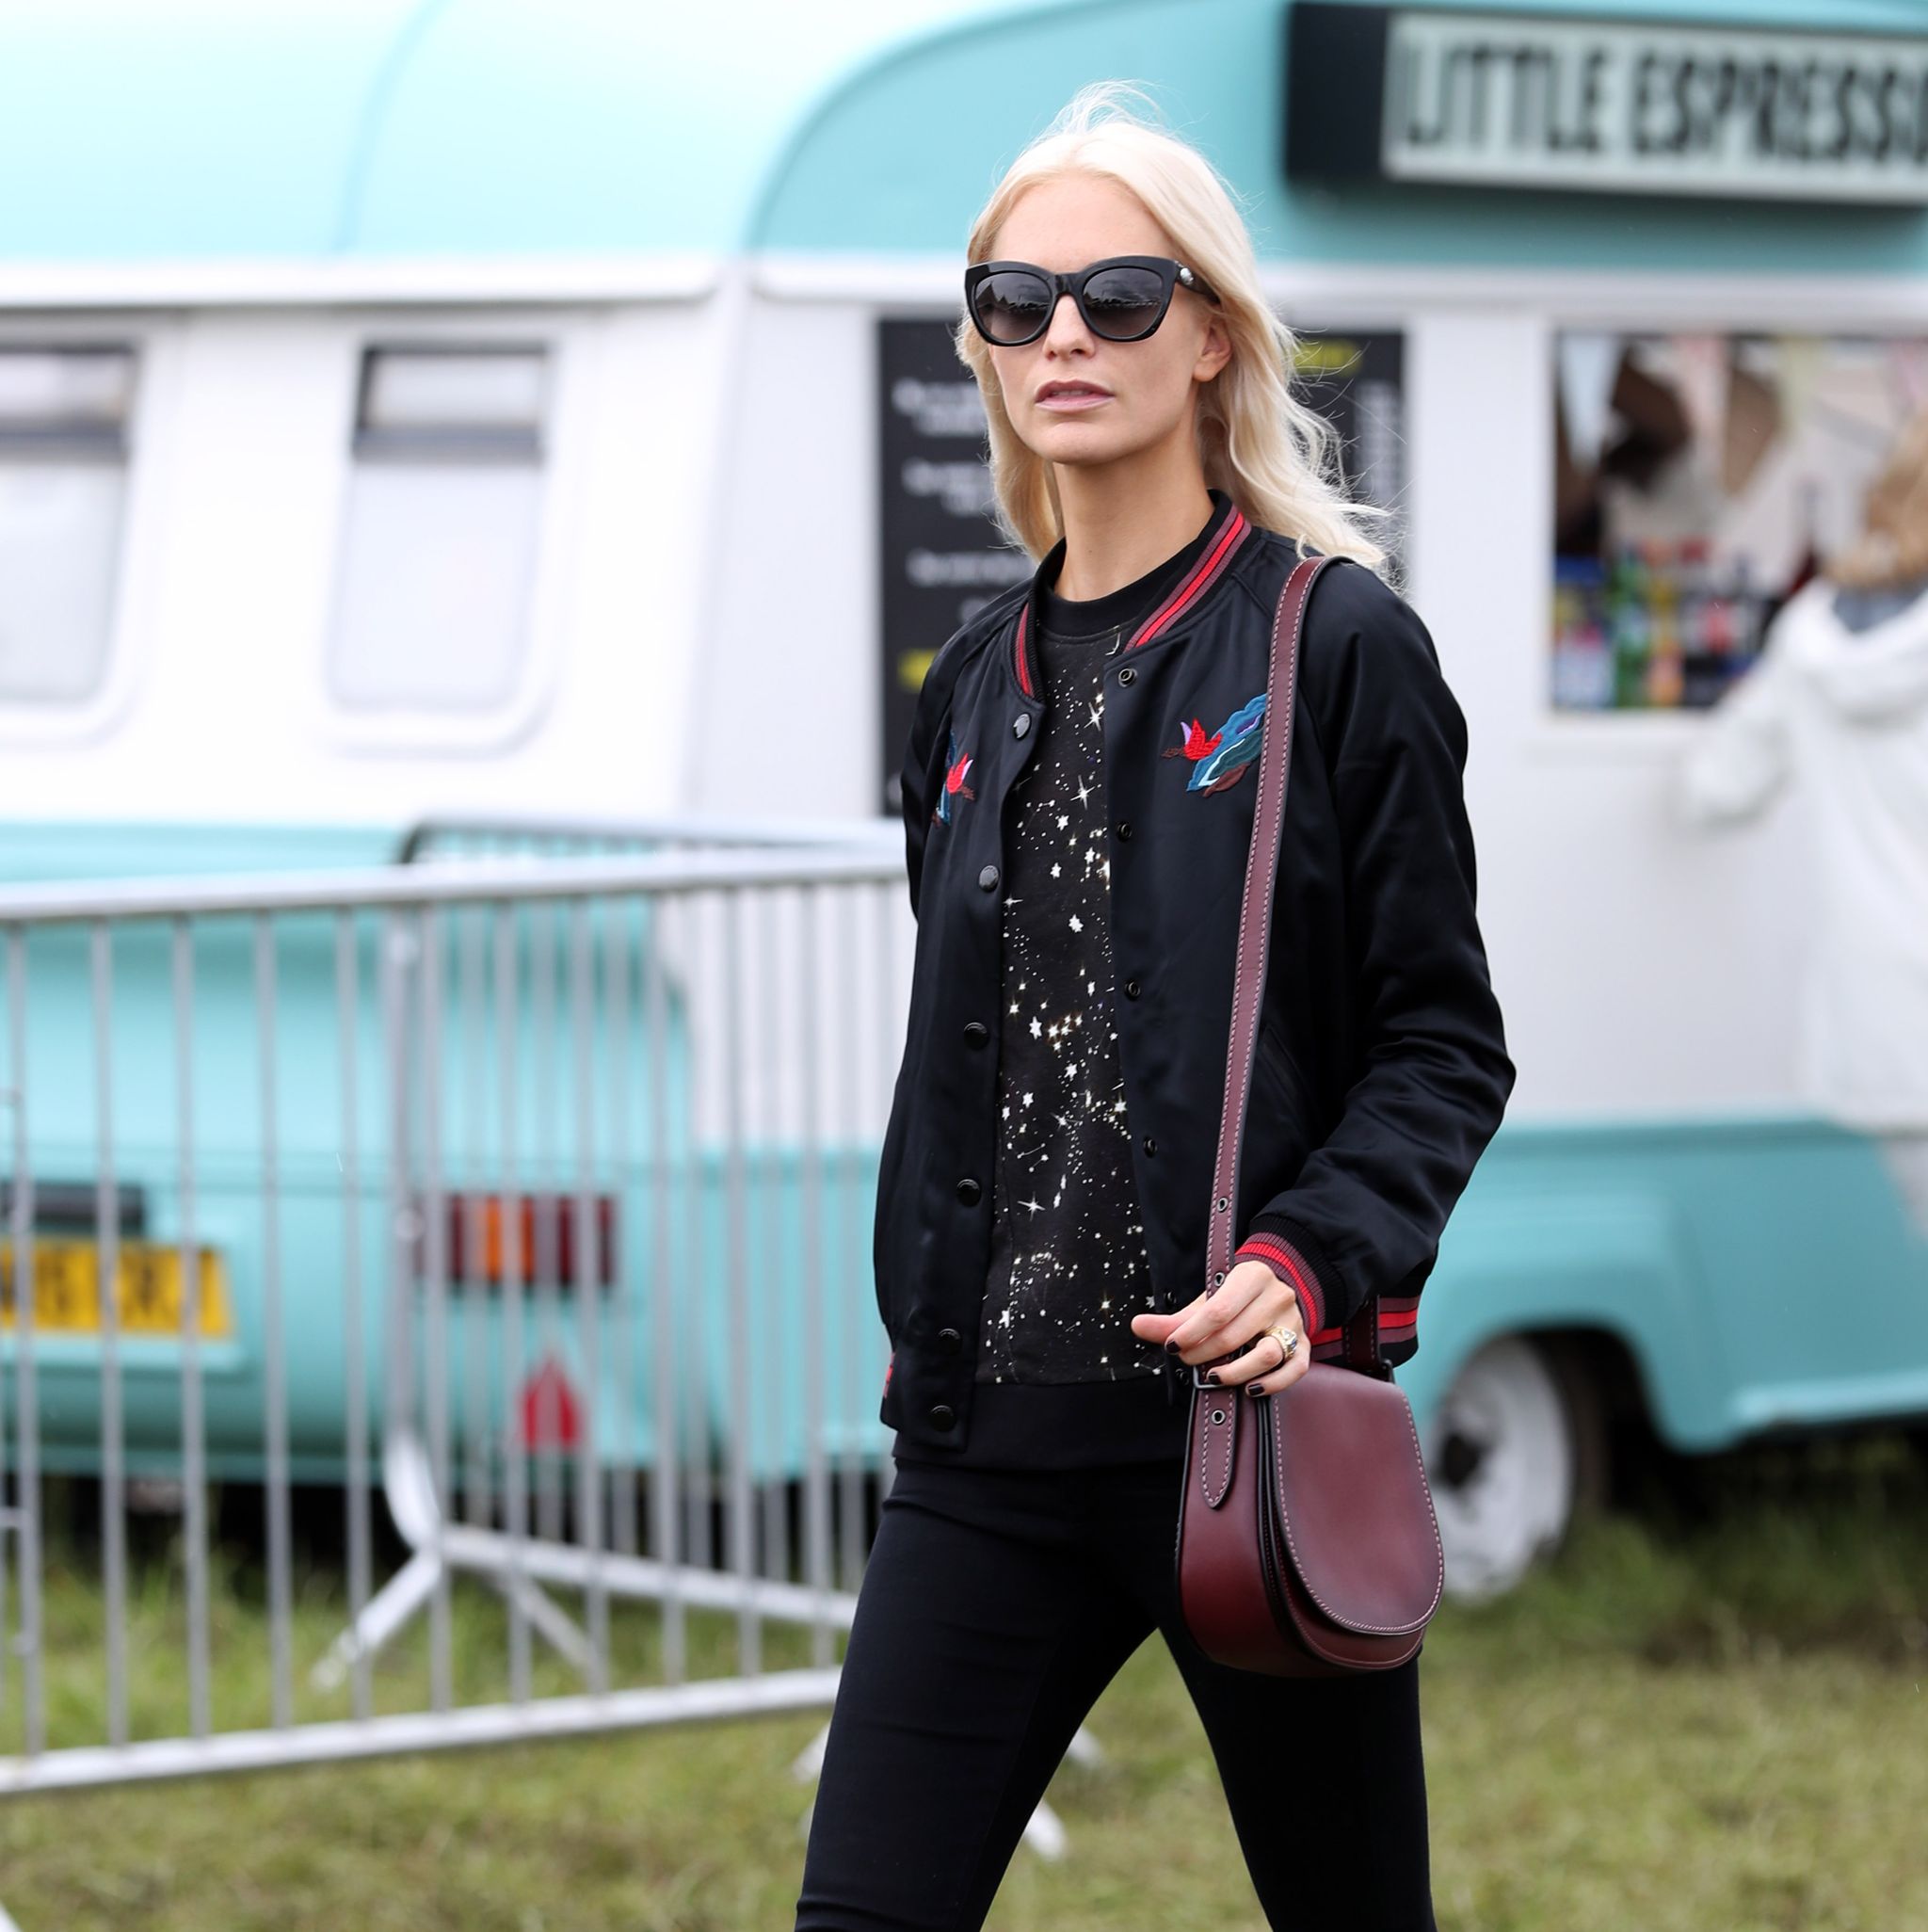 Poppy Delevingne makes a bold style statement in plunging black